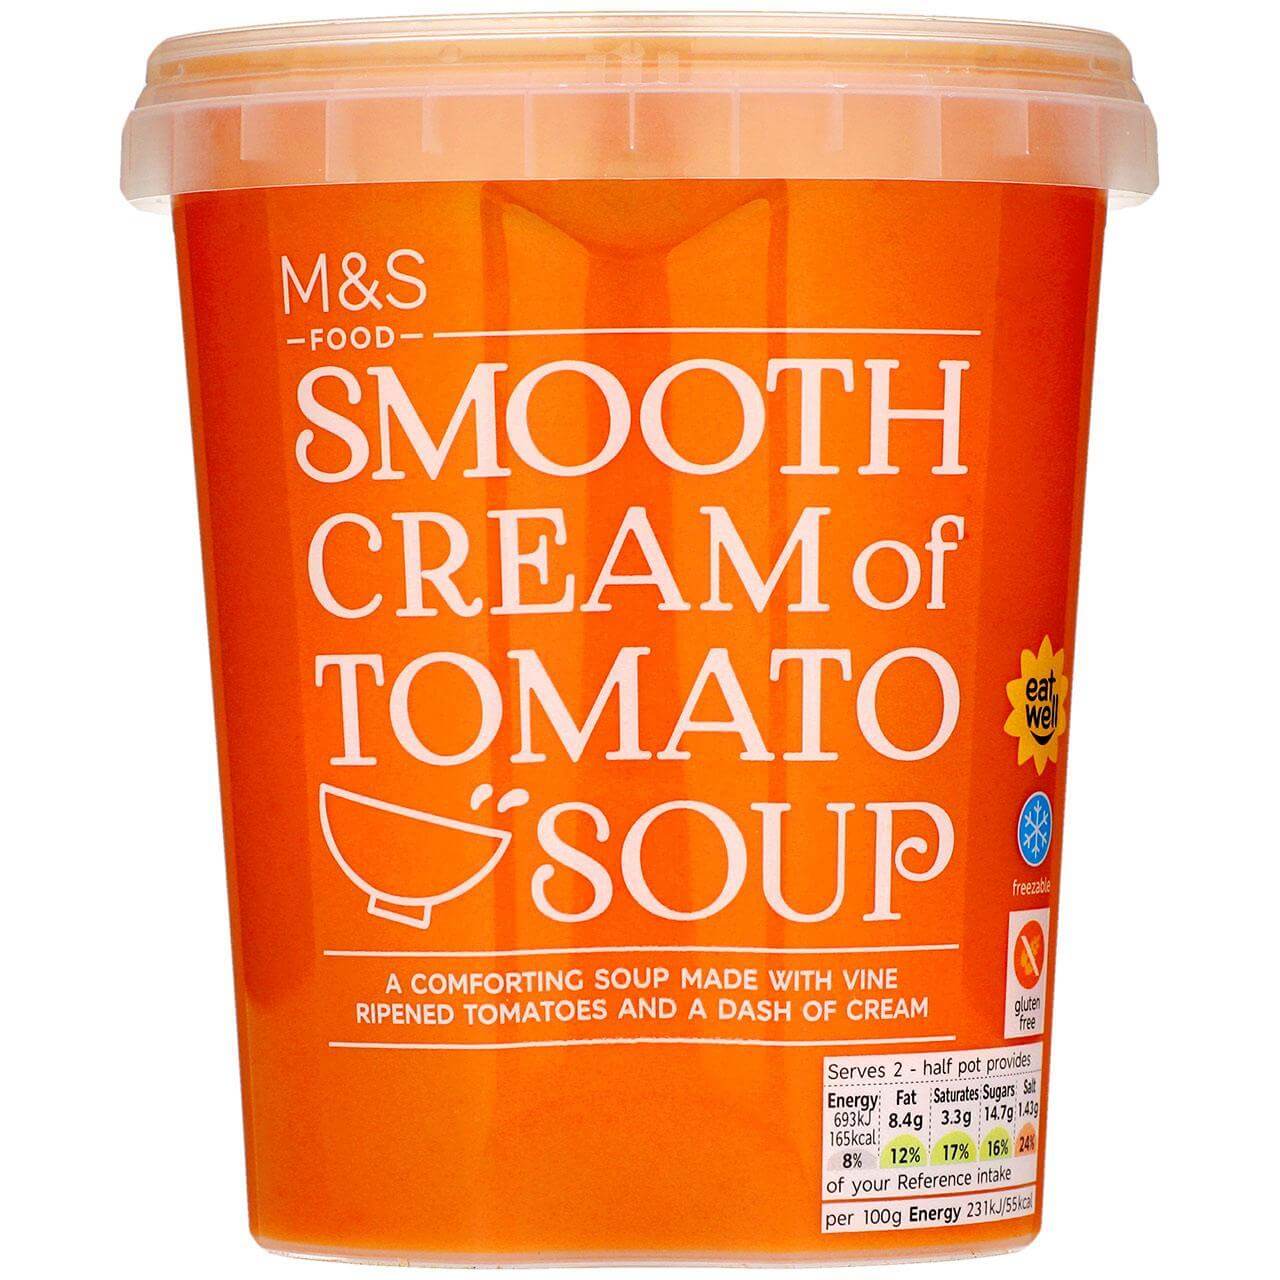 Image of M&S Smooth Cream of Tomato Soup made in the UK by Marks & Spencer Food. Buying this product supports a UK business, jobs and the local community